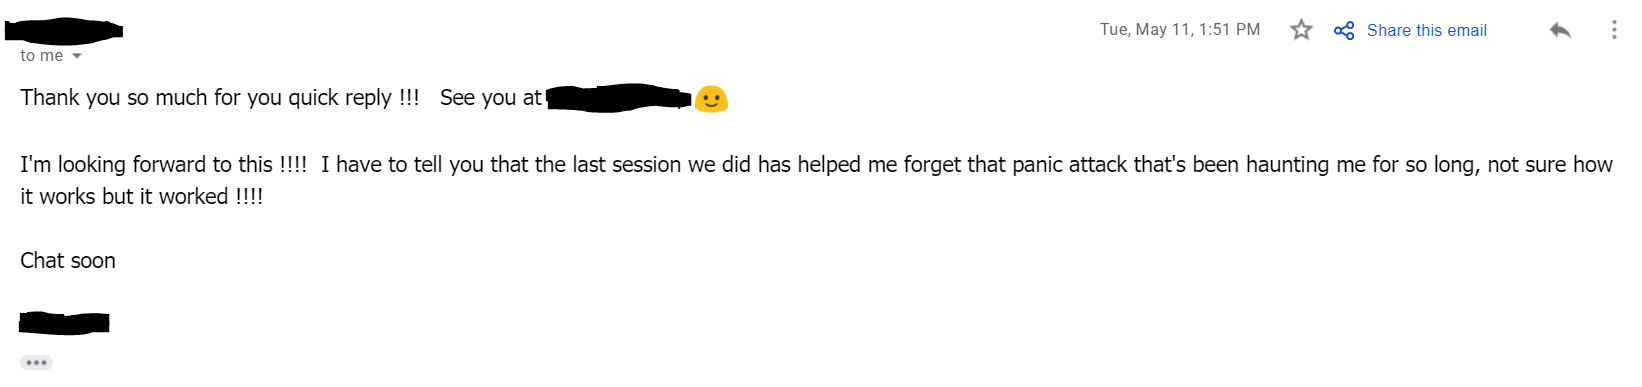 "I have to tell you that the last session we did has helped me forget that panic attack that's been haunting me for so long, not sure how it works but it worked !!!!"